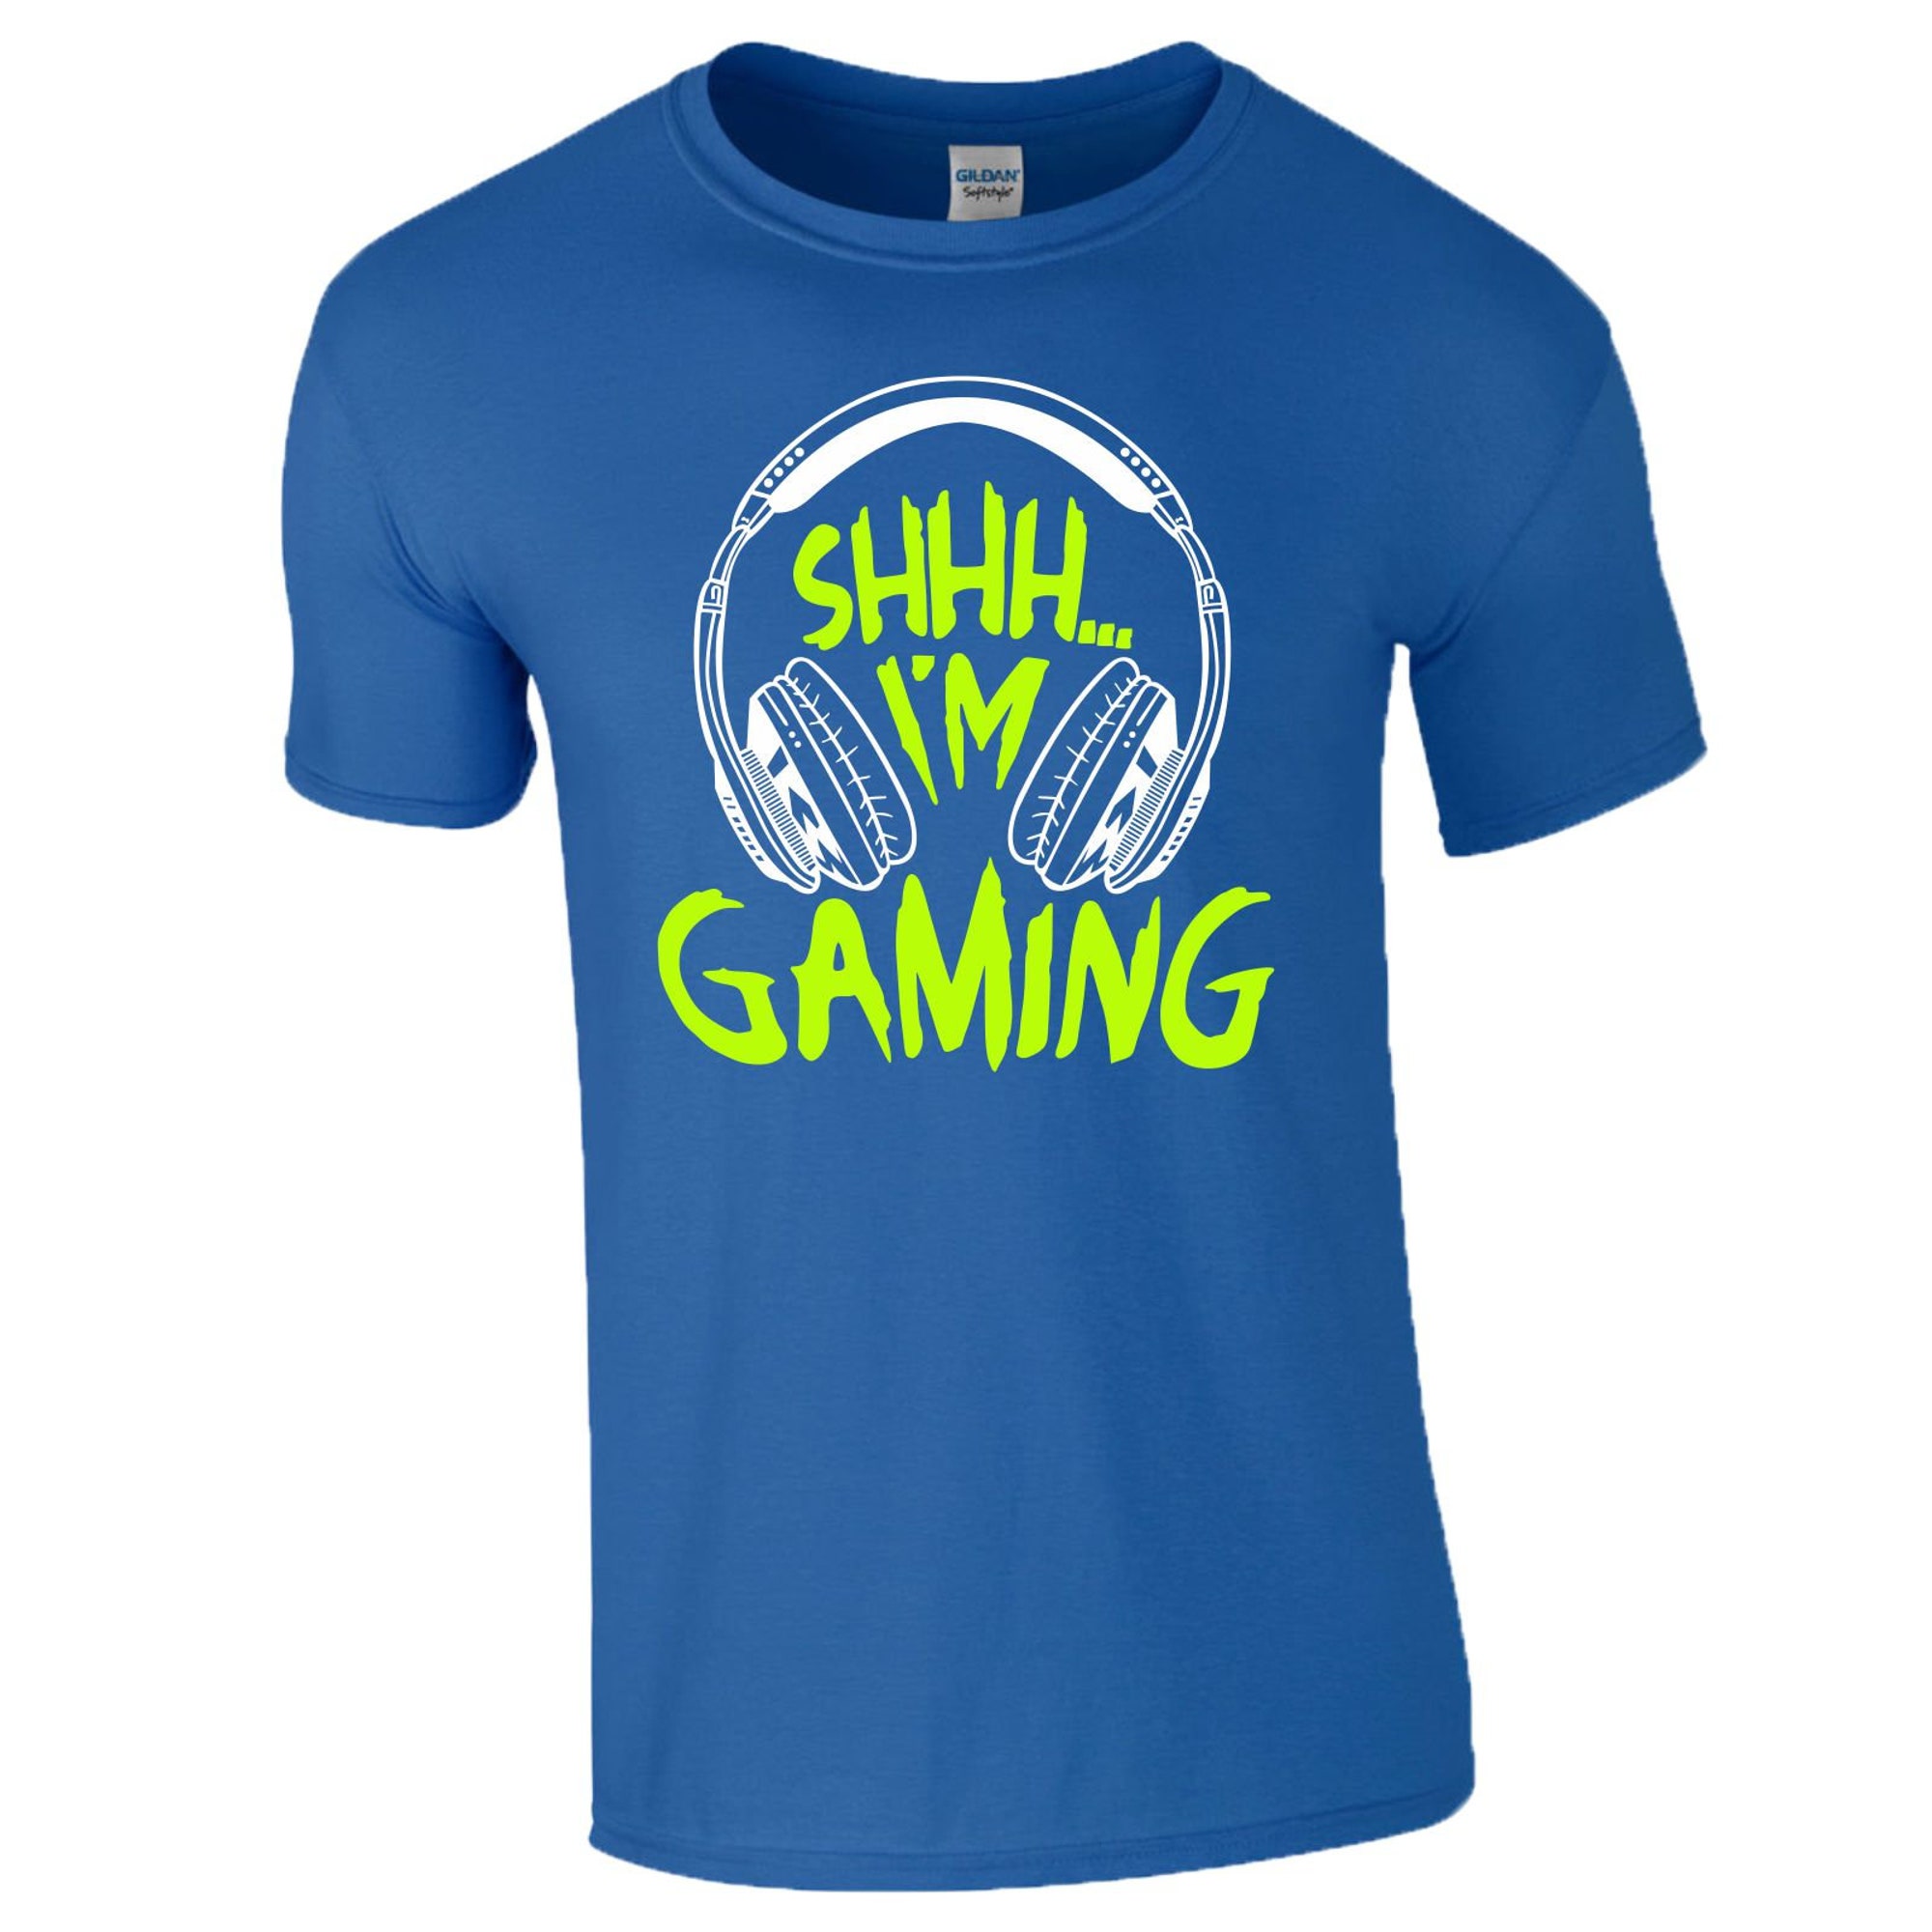 Discover Gamer T Shirt Shhh... I'm Gaming Funny Slogan Among US Game Festival Birthday Christmas Party Men Top Gift